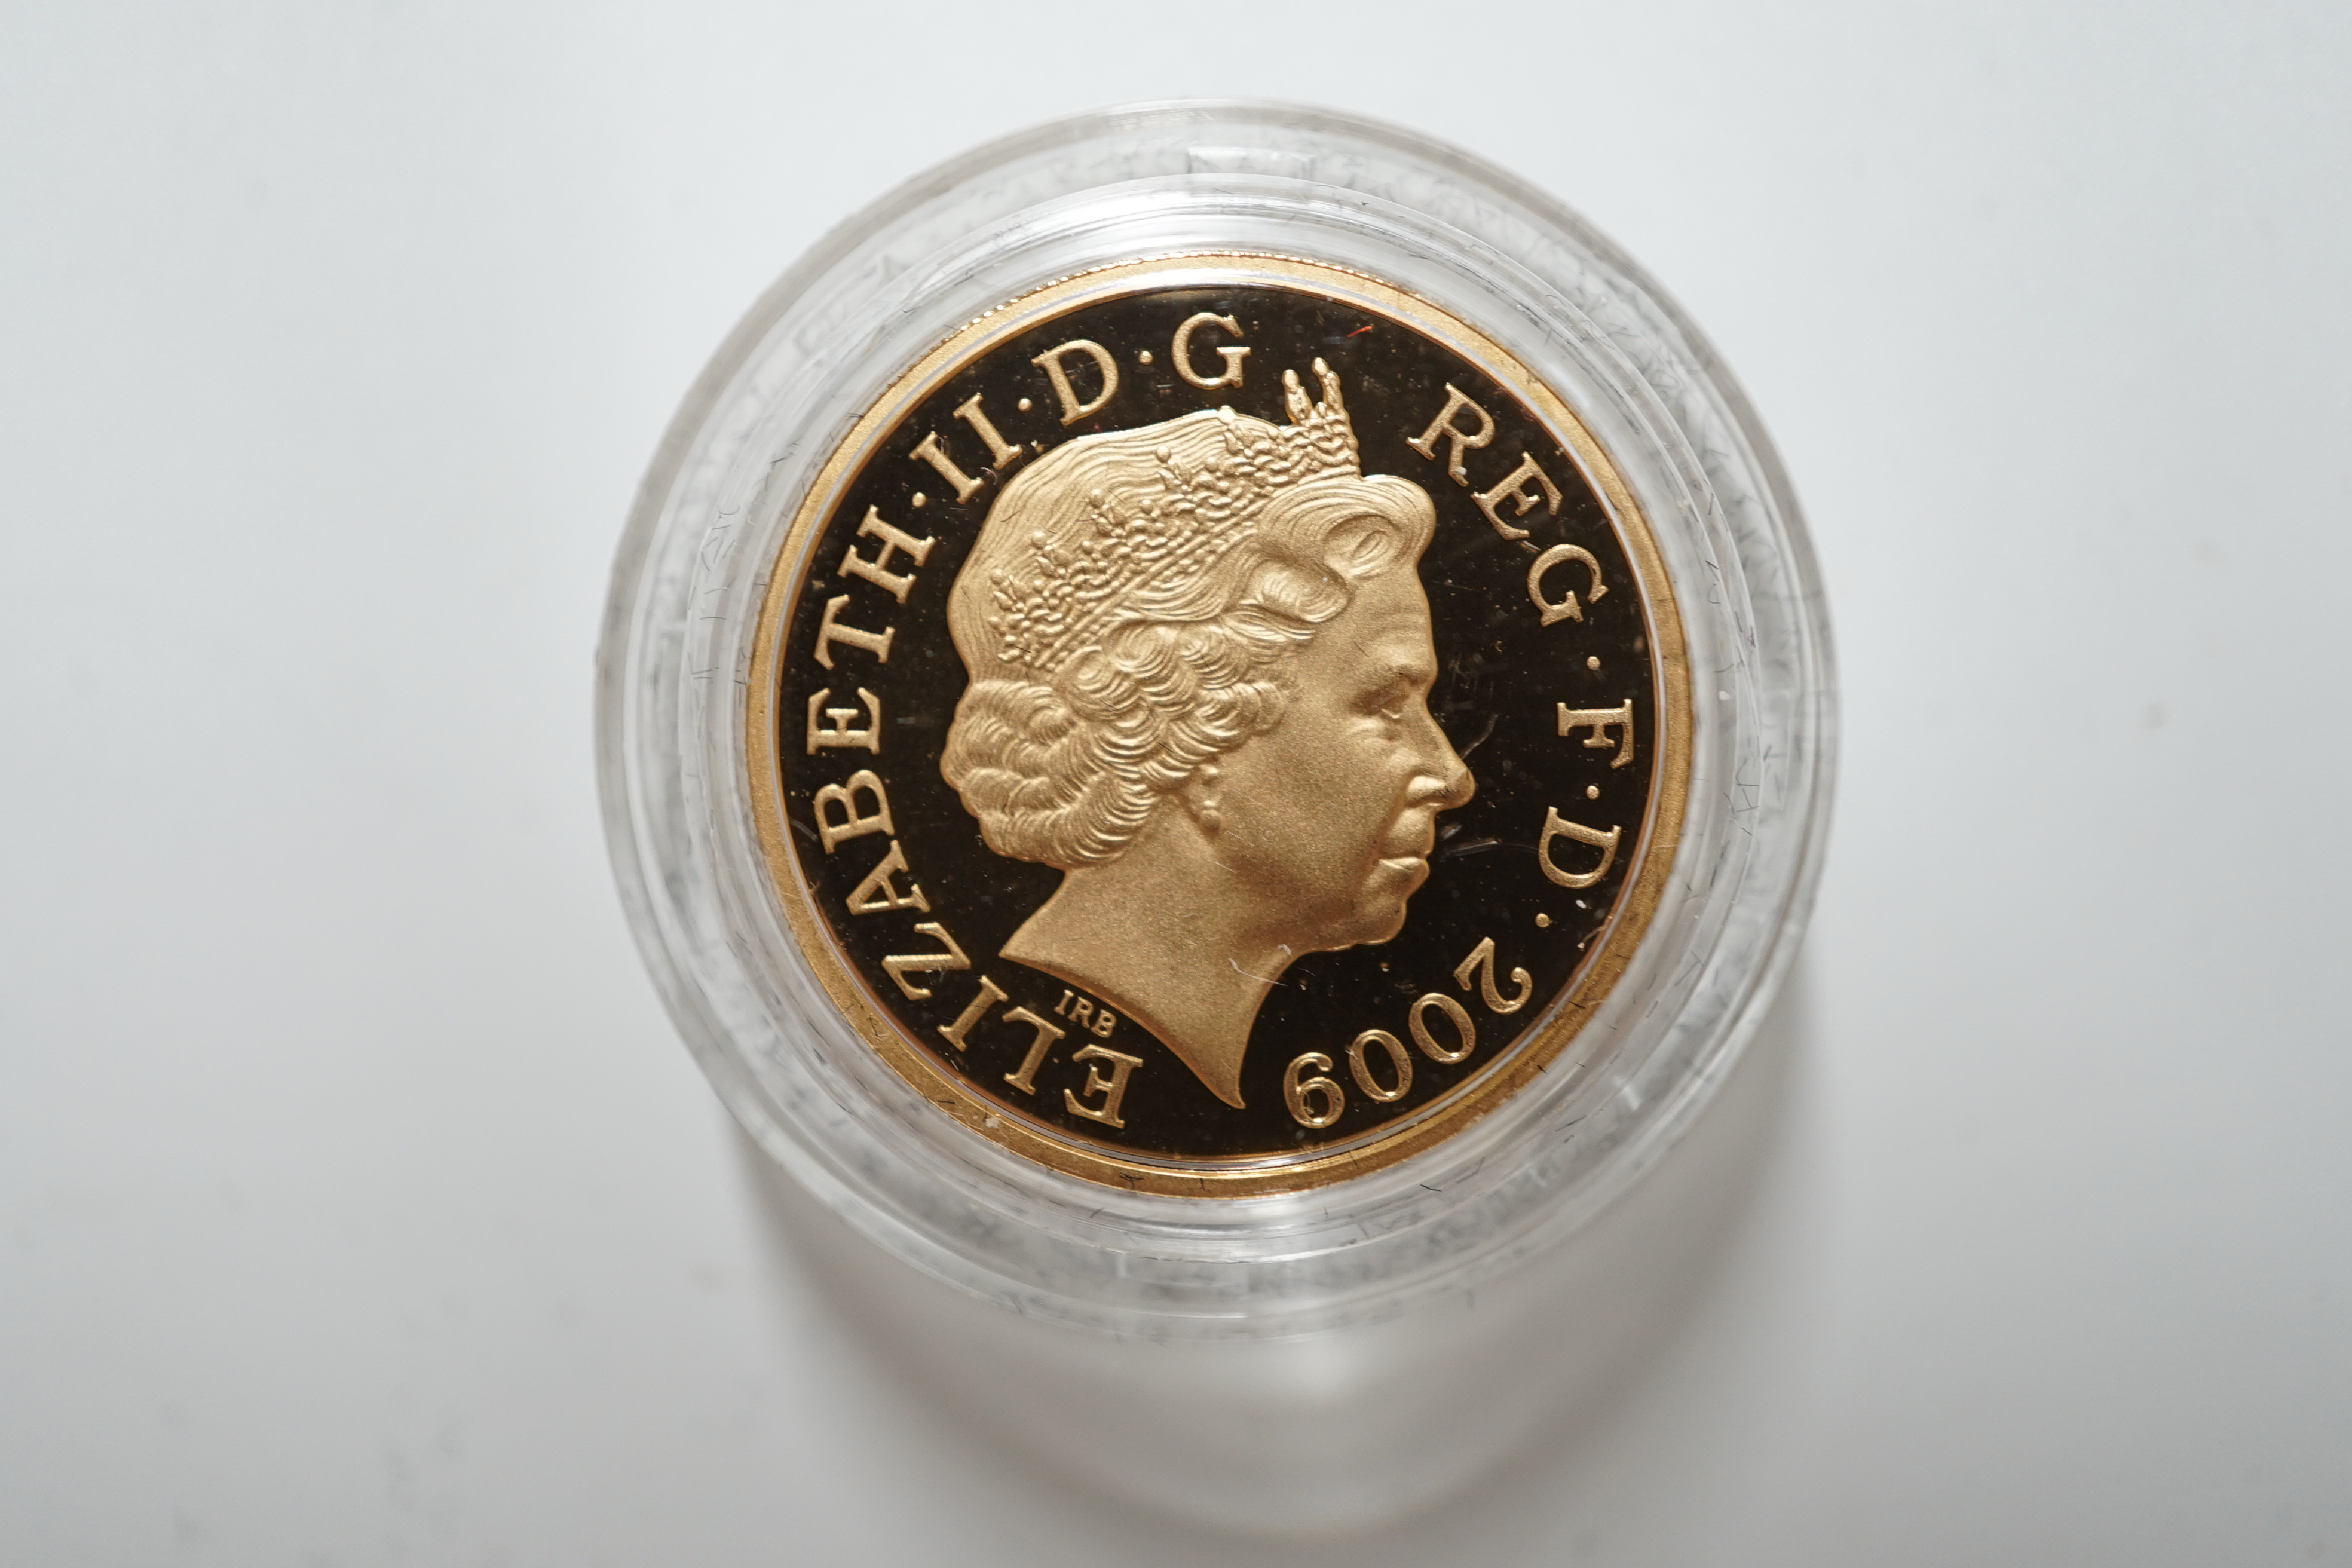 British gold coins, Elizabeth II, 2009 Shield of the Royal Arms £1 gold proof coin, in case of issue with certificate